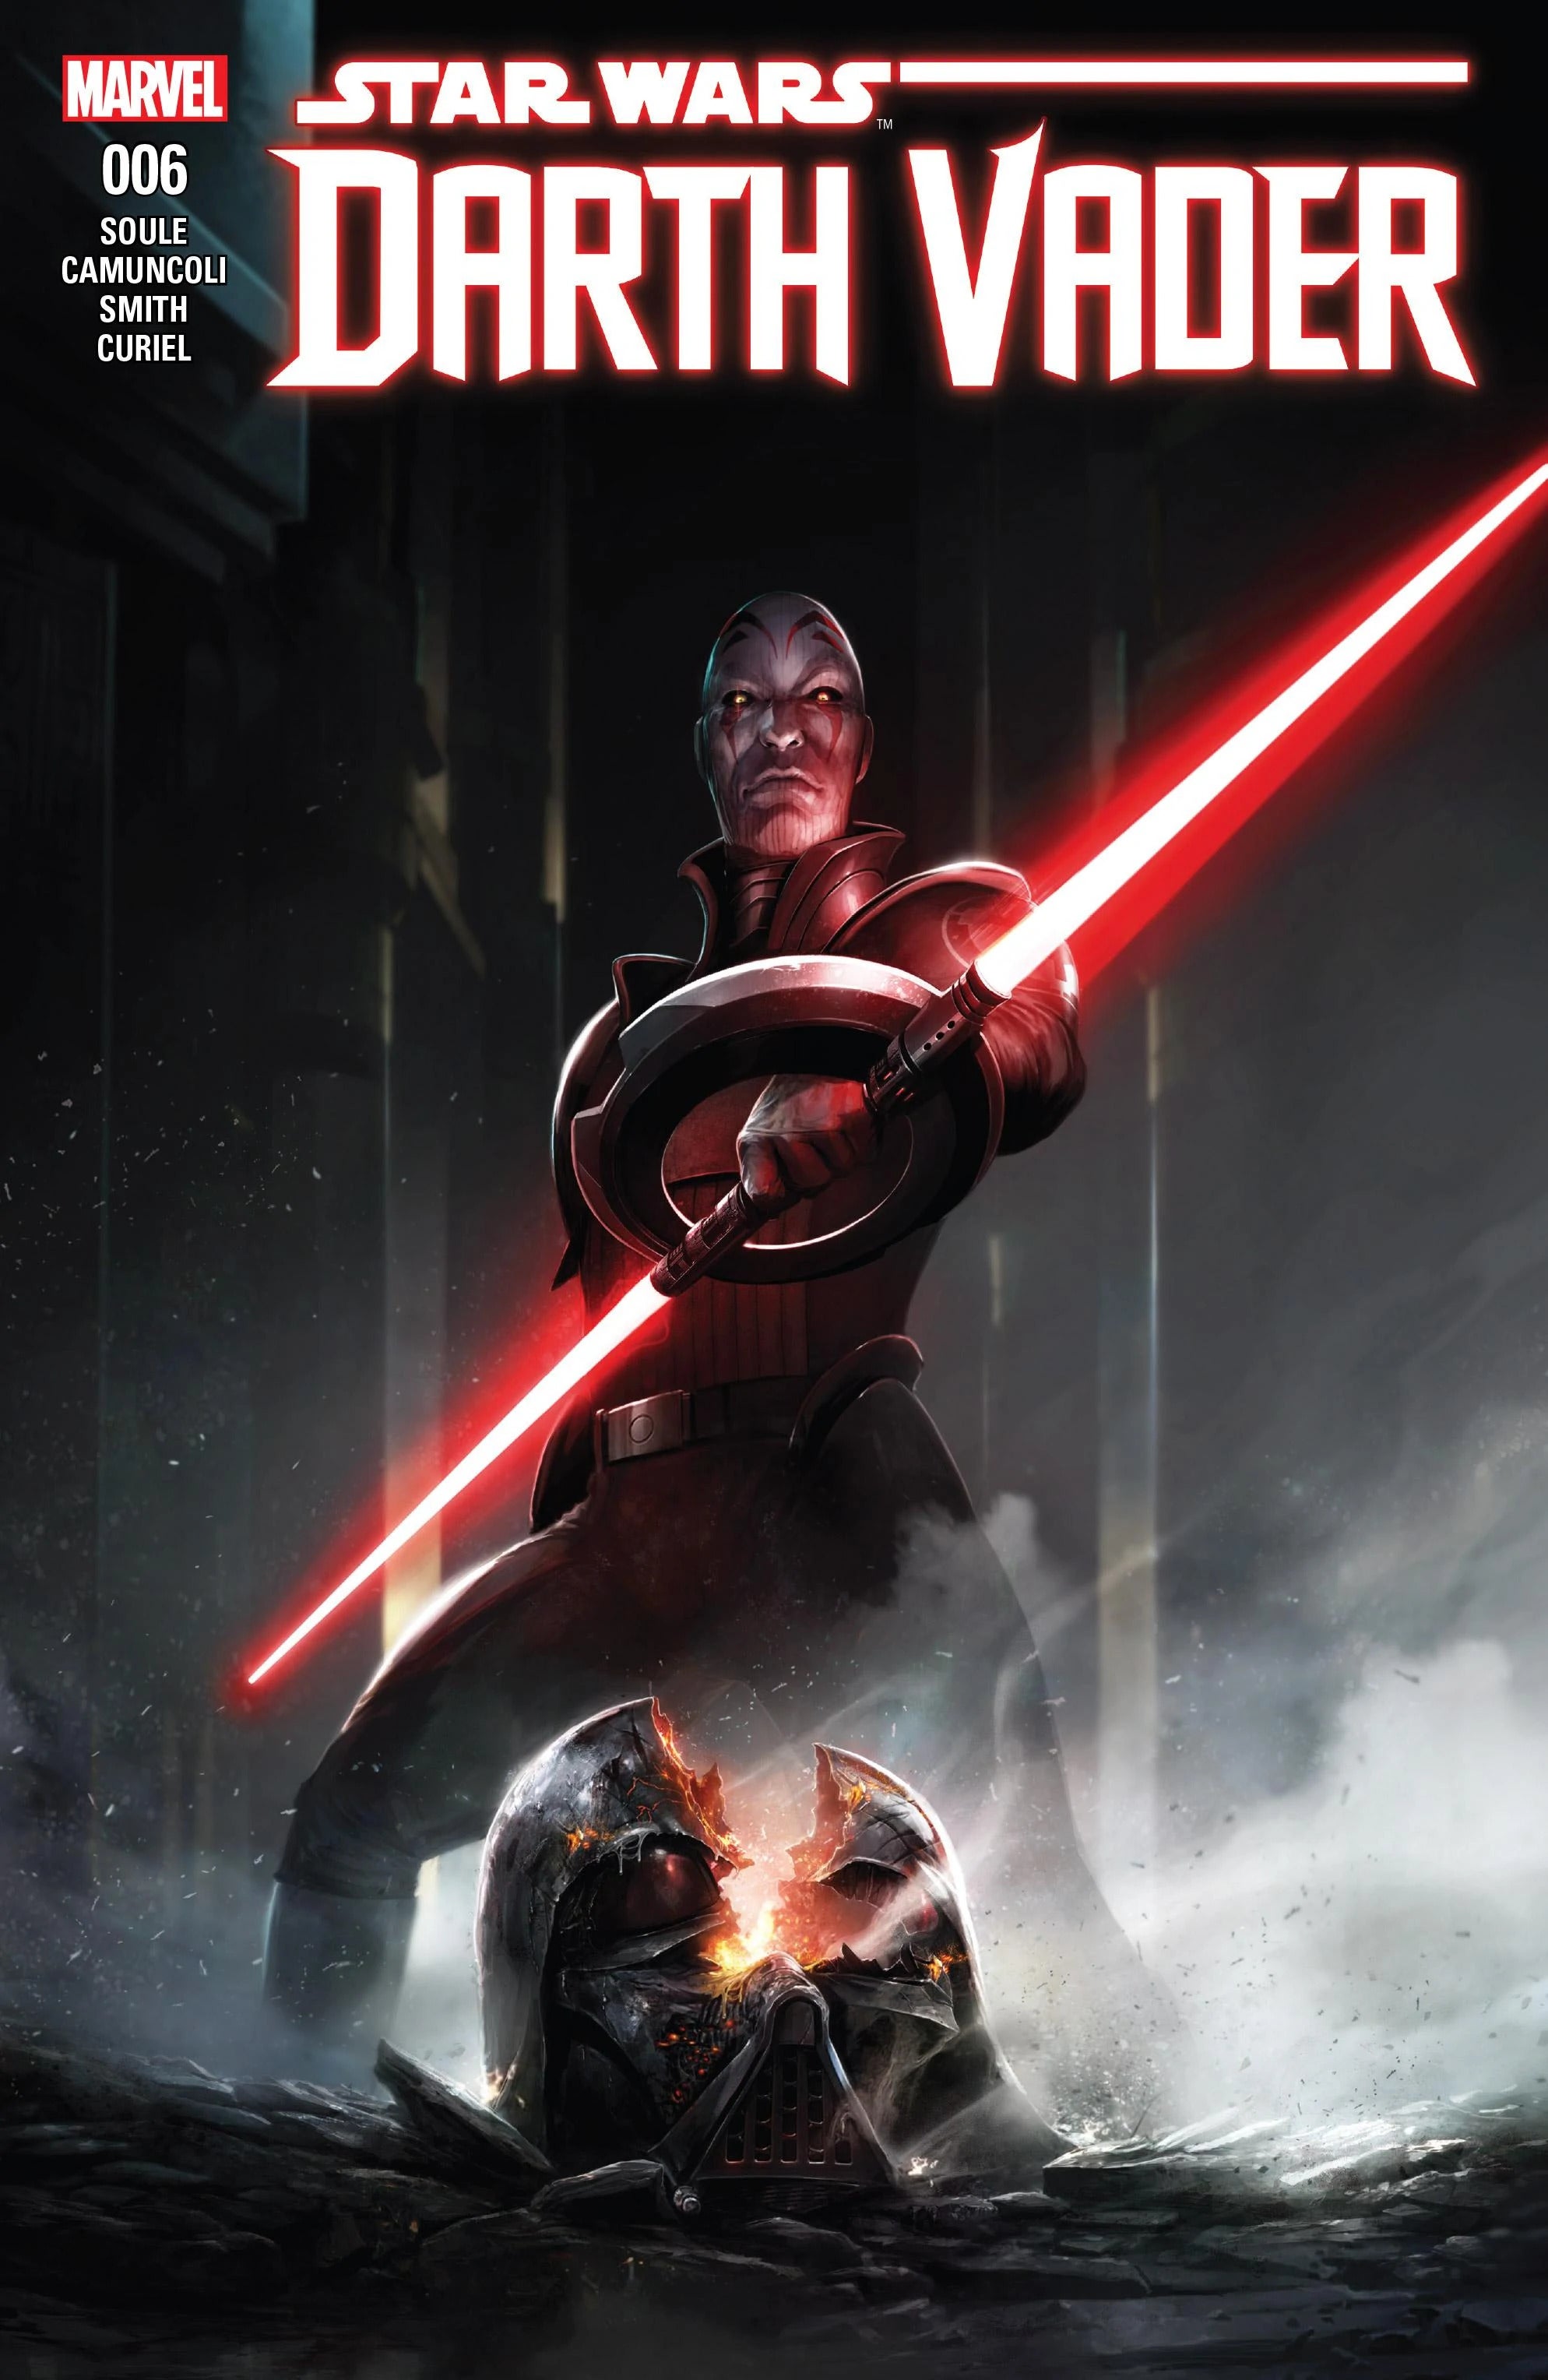 Star Wars Darth Vader 2017 comic cover, The Grand Inquisitor is in the center holding a red dual-ended lightsaber with Vader's helmet split in half on the ground